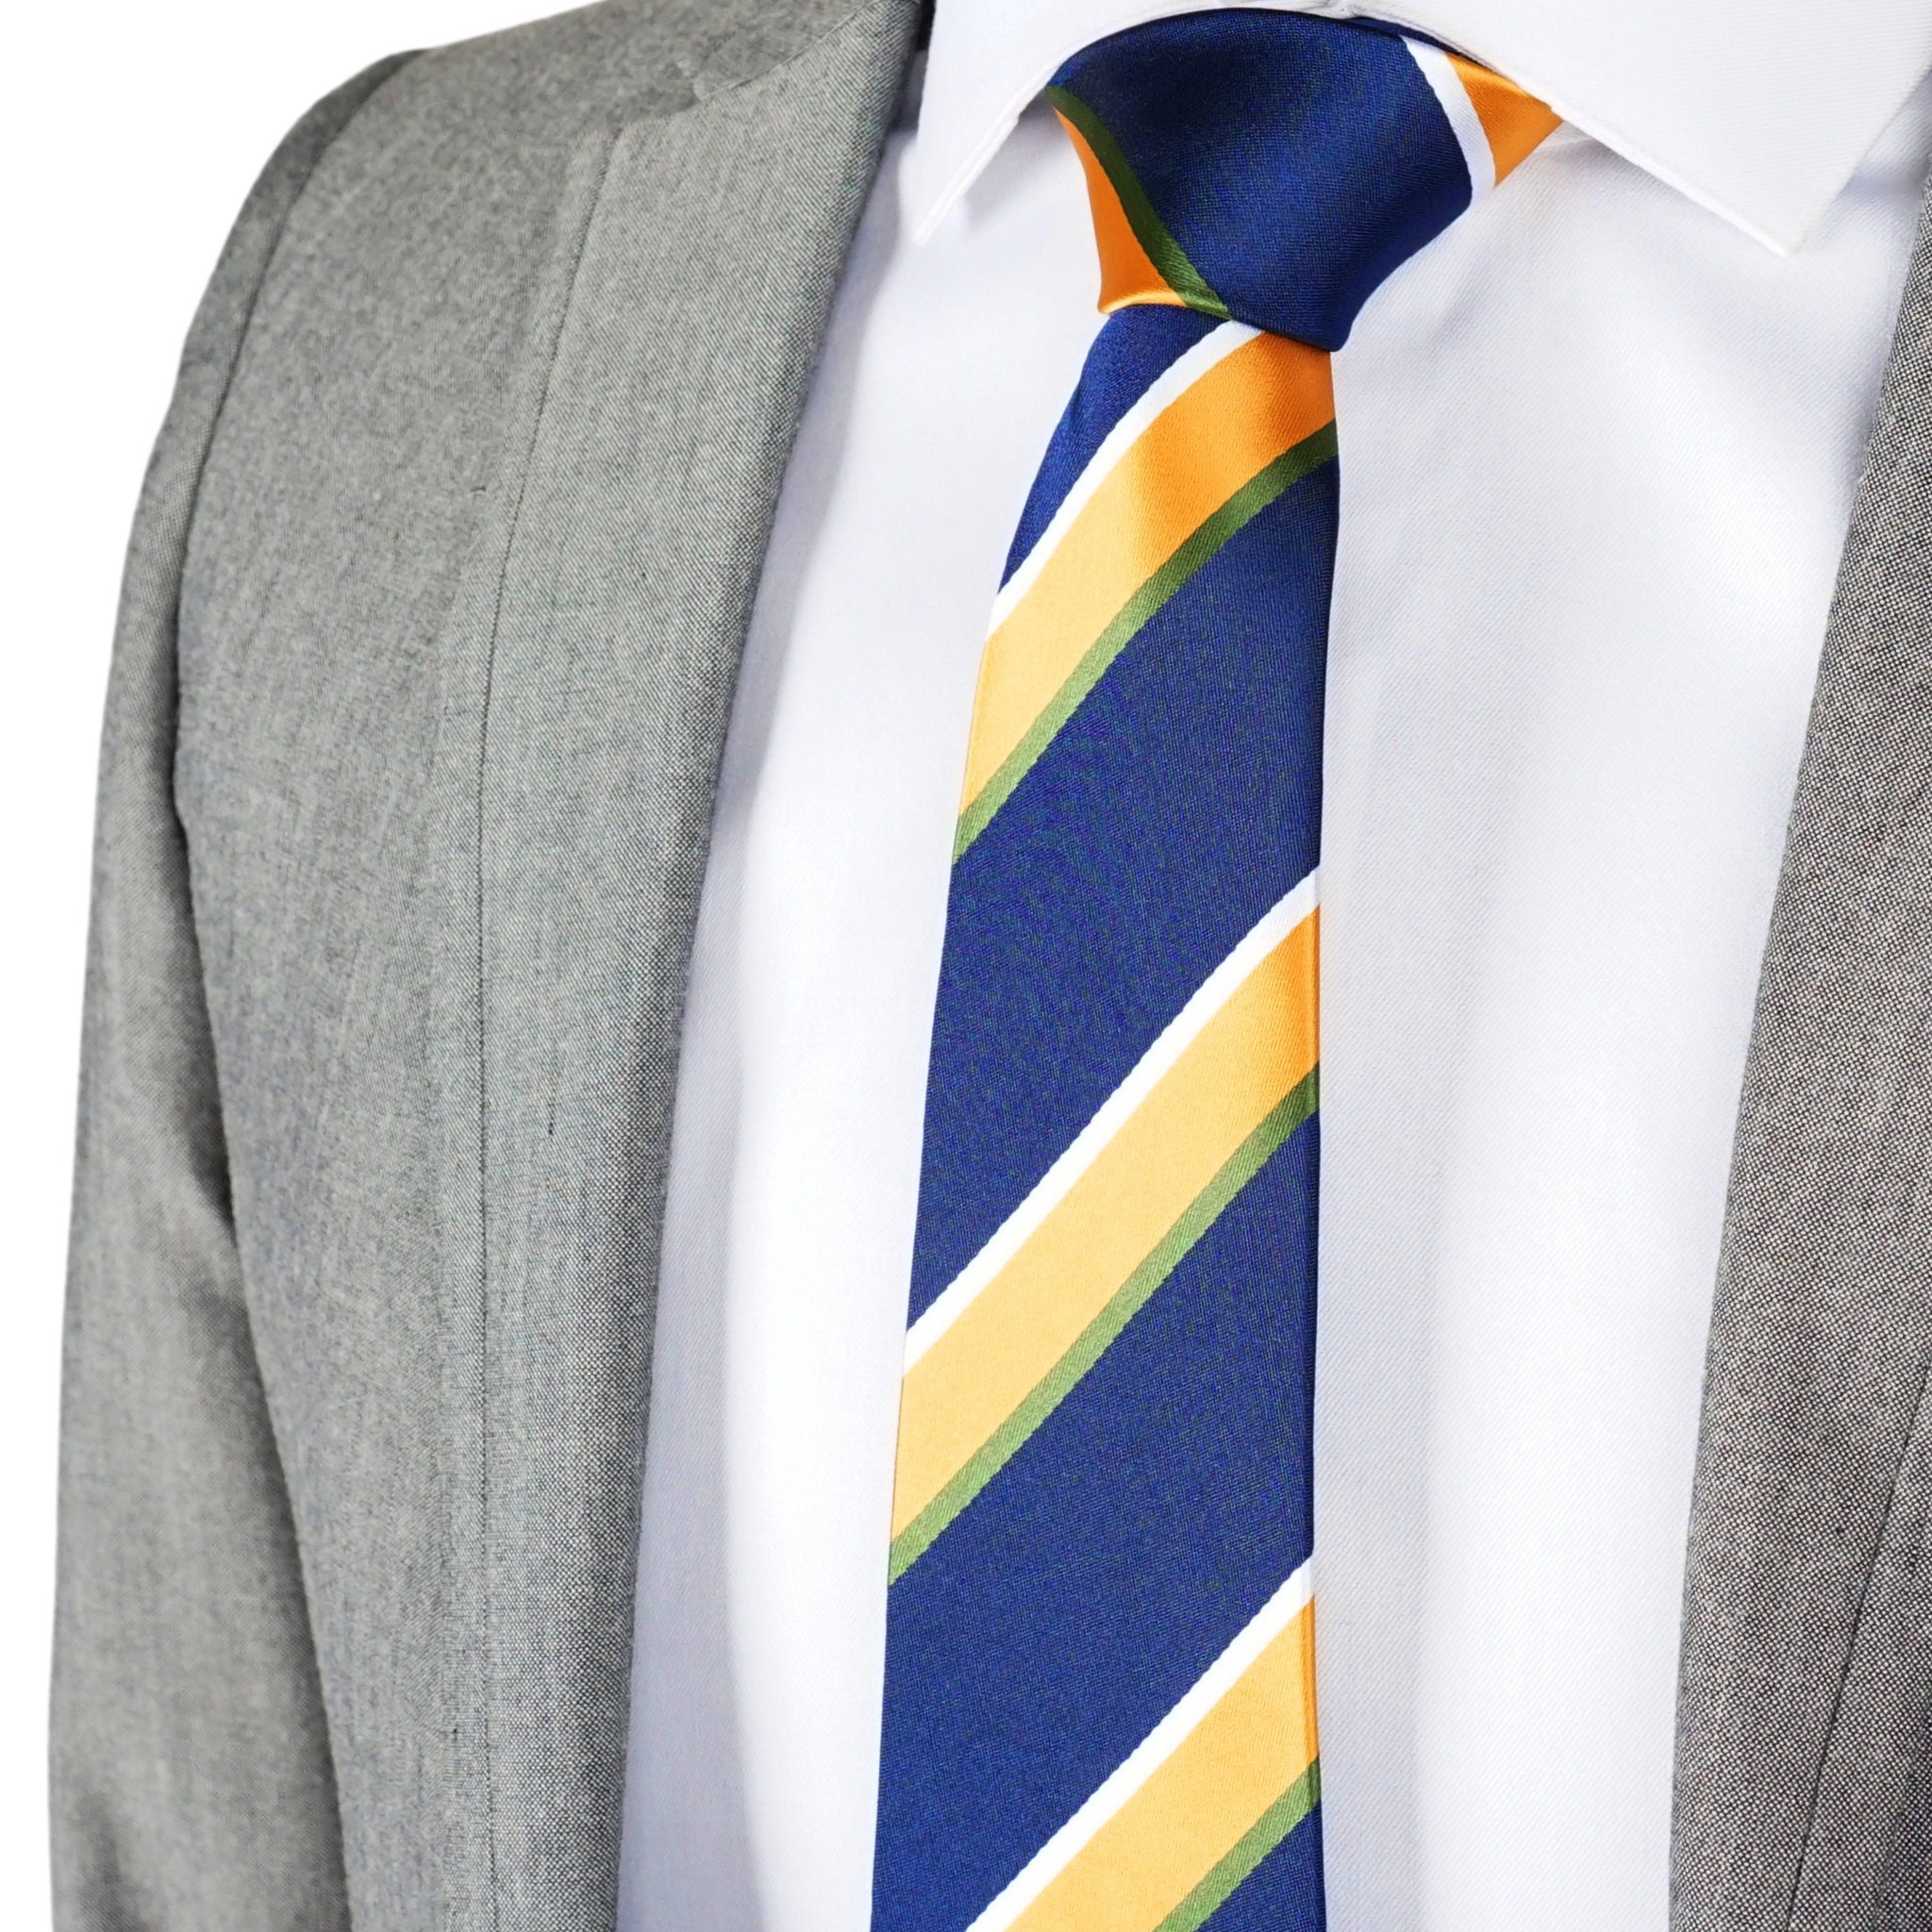 Utah Basketball Tie - Inspired by the Colors of the Utah Jazz: Navy Blue,  Gold, Green & White 60 Men's Necktie : Sports & Outdoors 